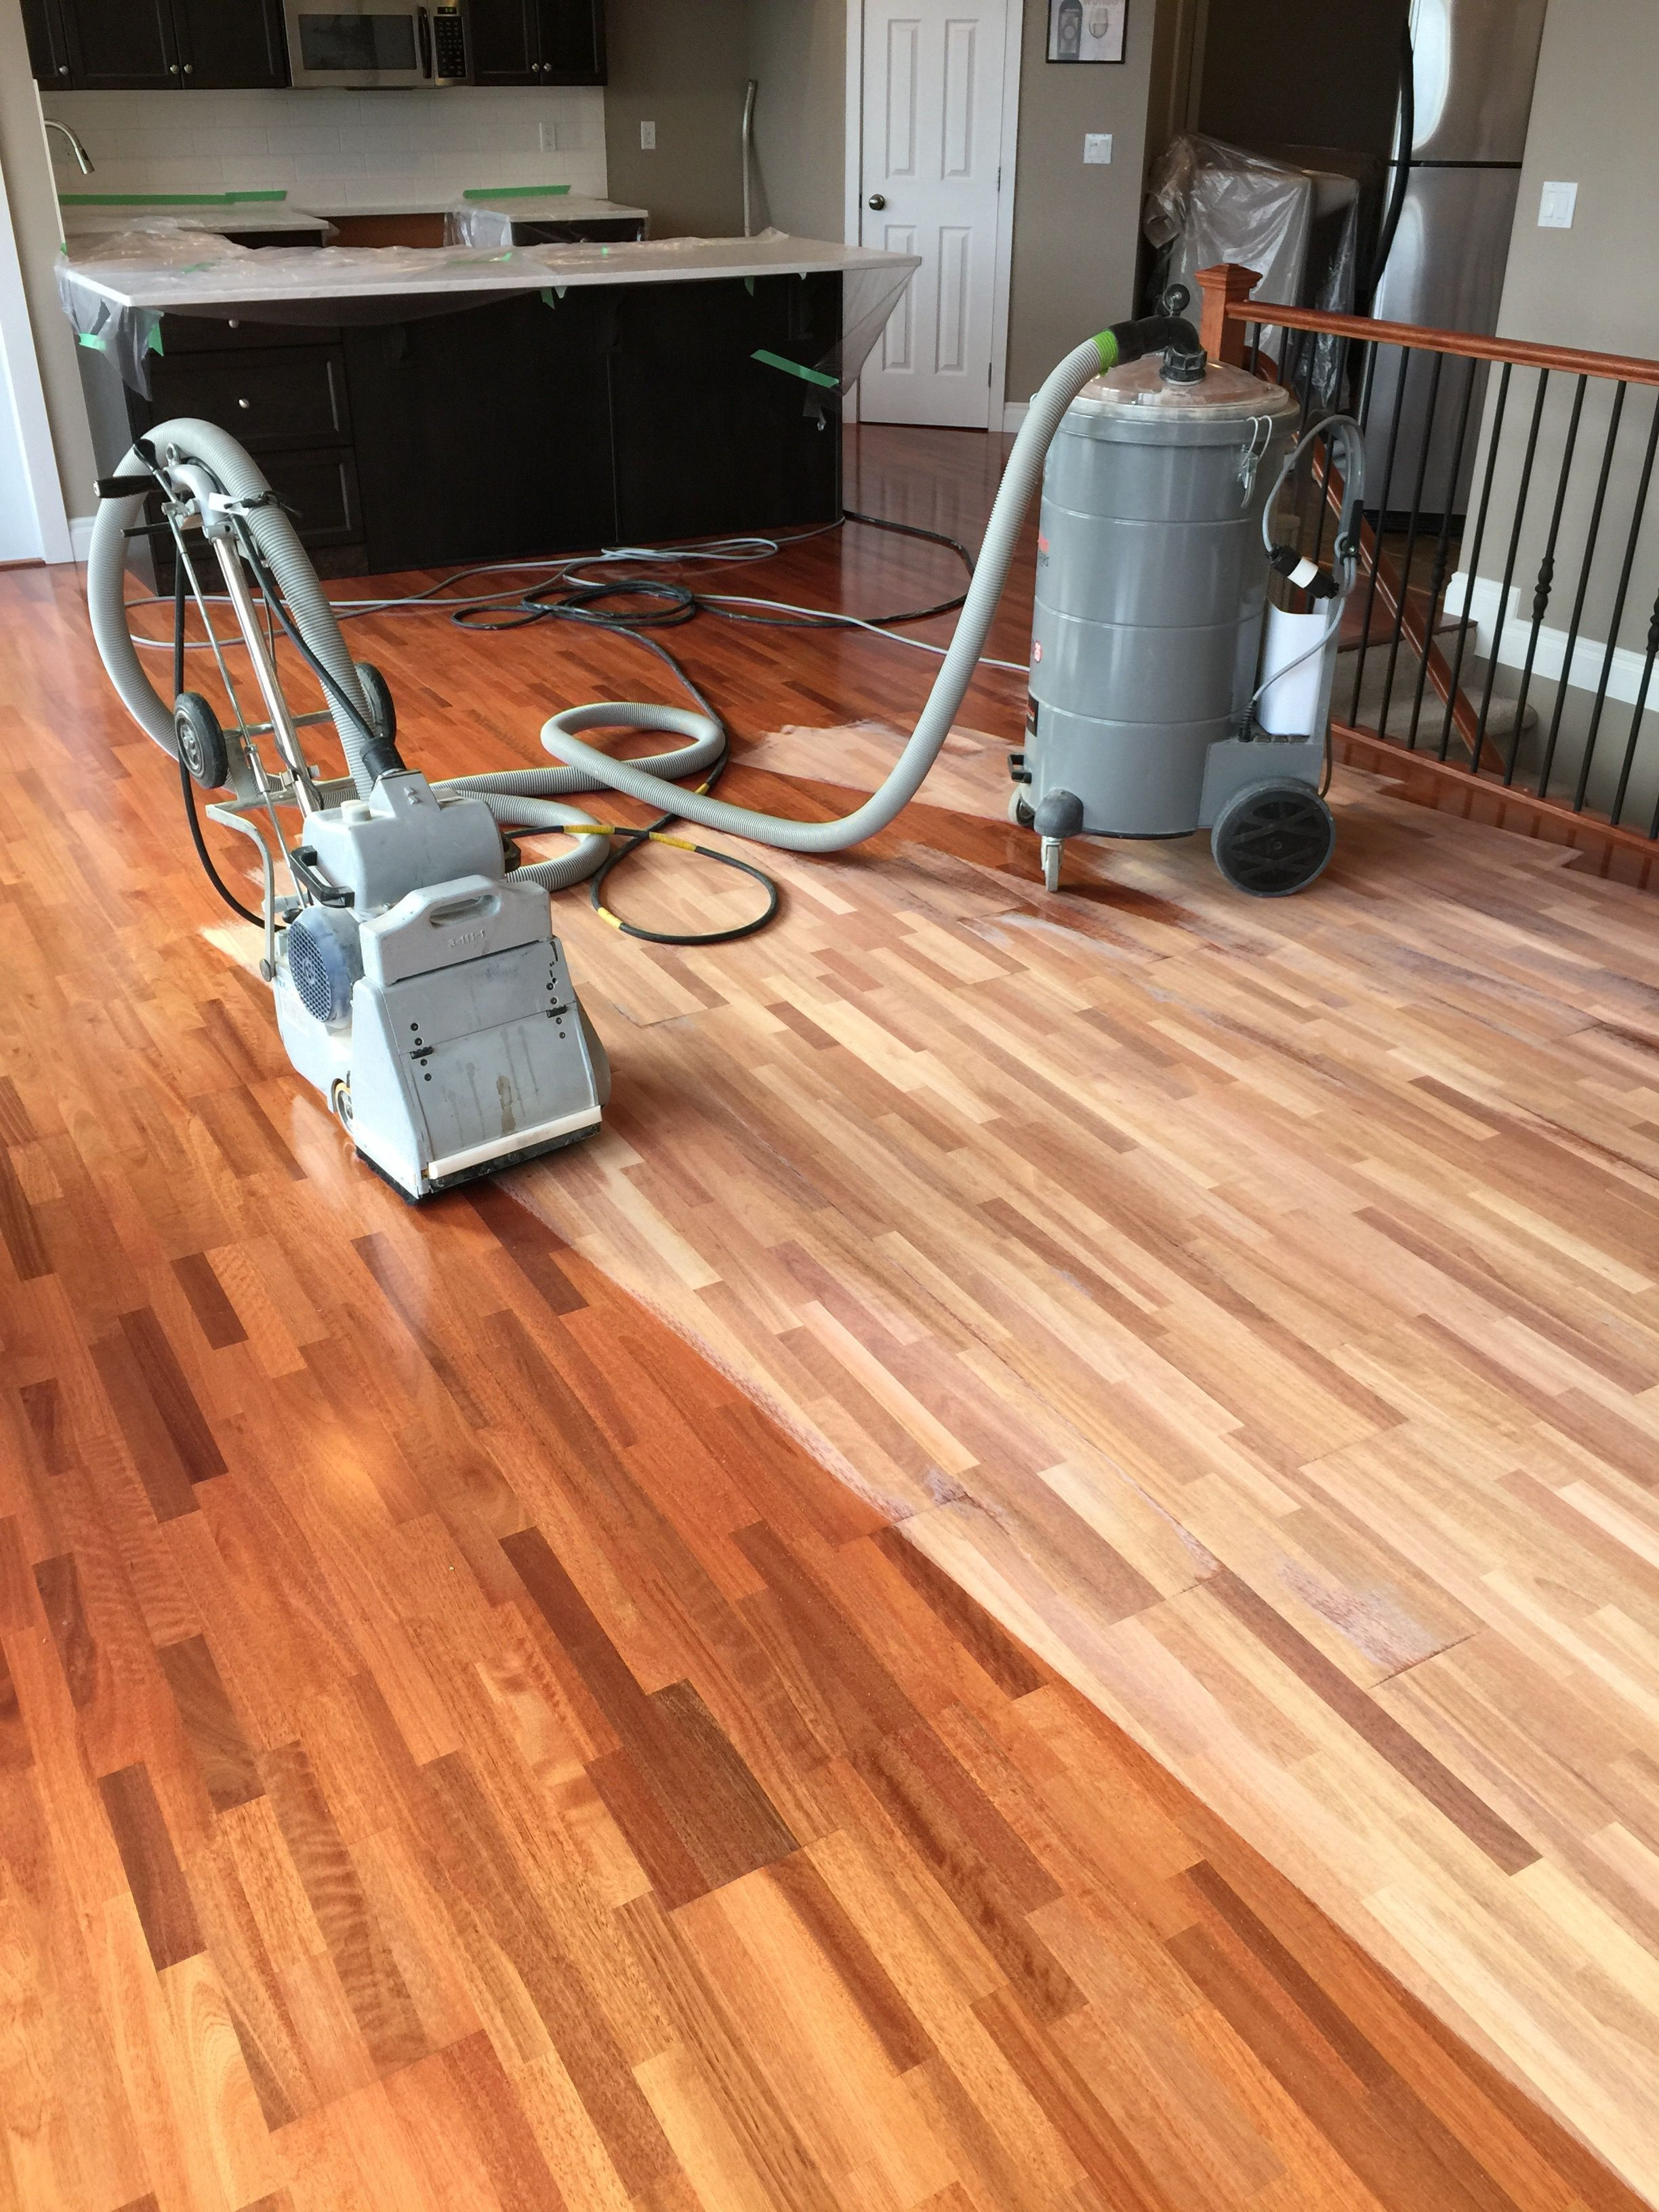 how long does refinishing hardwood floors take of evergreen hardwood floors ensure that your hardwood floor throughout evergreen hardwood floors ensure that your hardwood floor refinishing project is done correctly without the mess